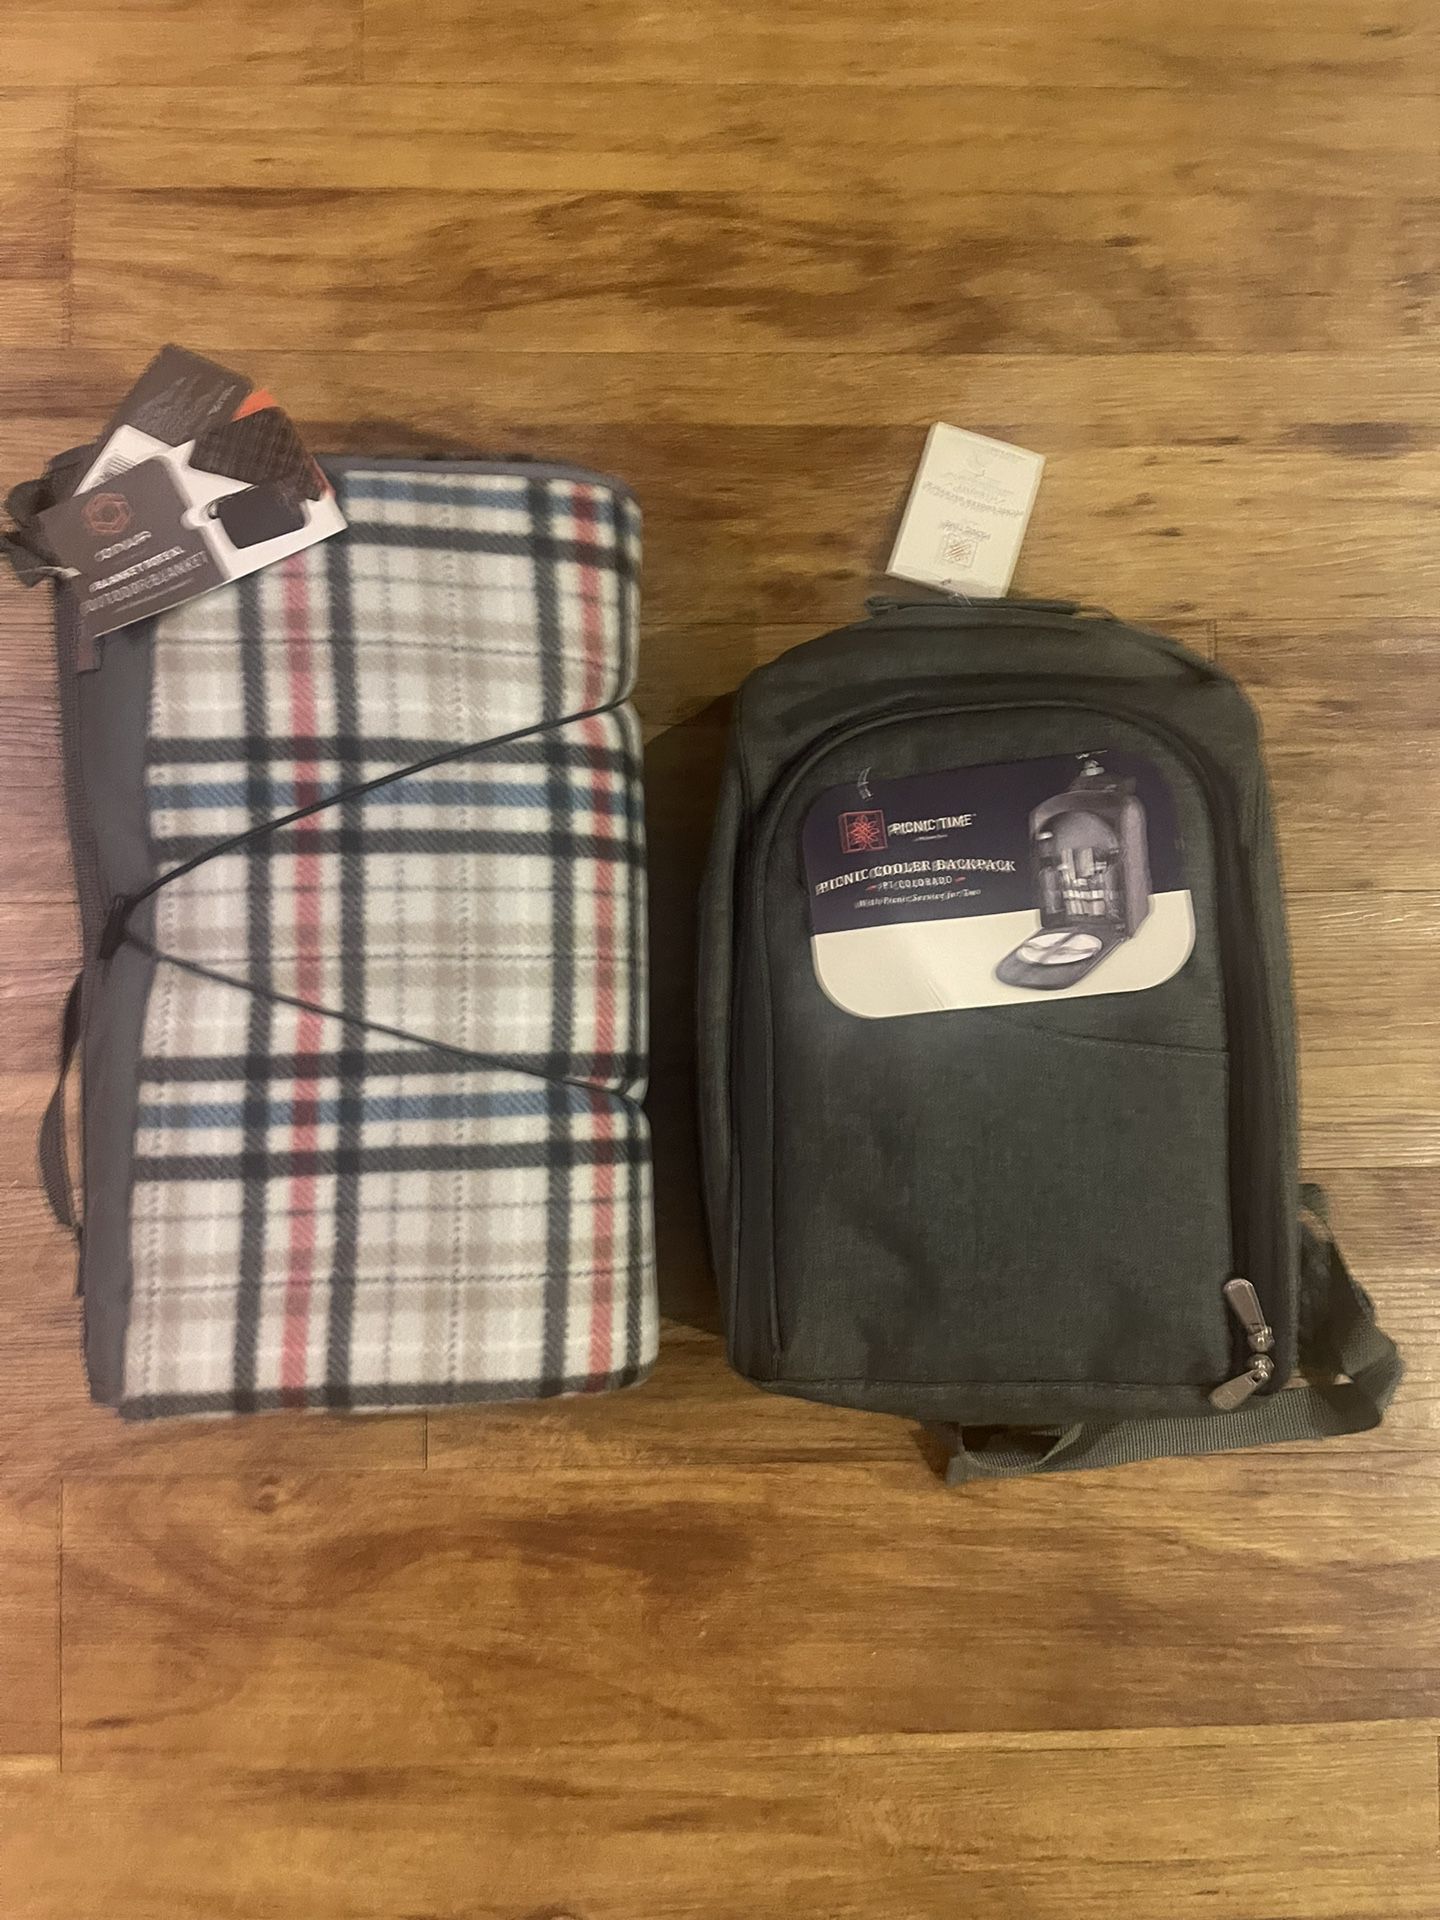 NWT Cooler Backpack & Blanket Outdoor Picnic Set - Brand New